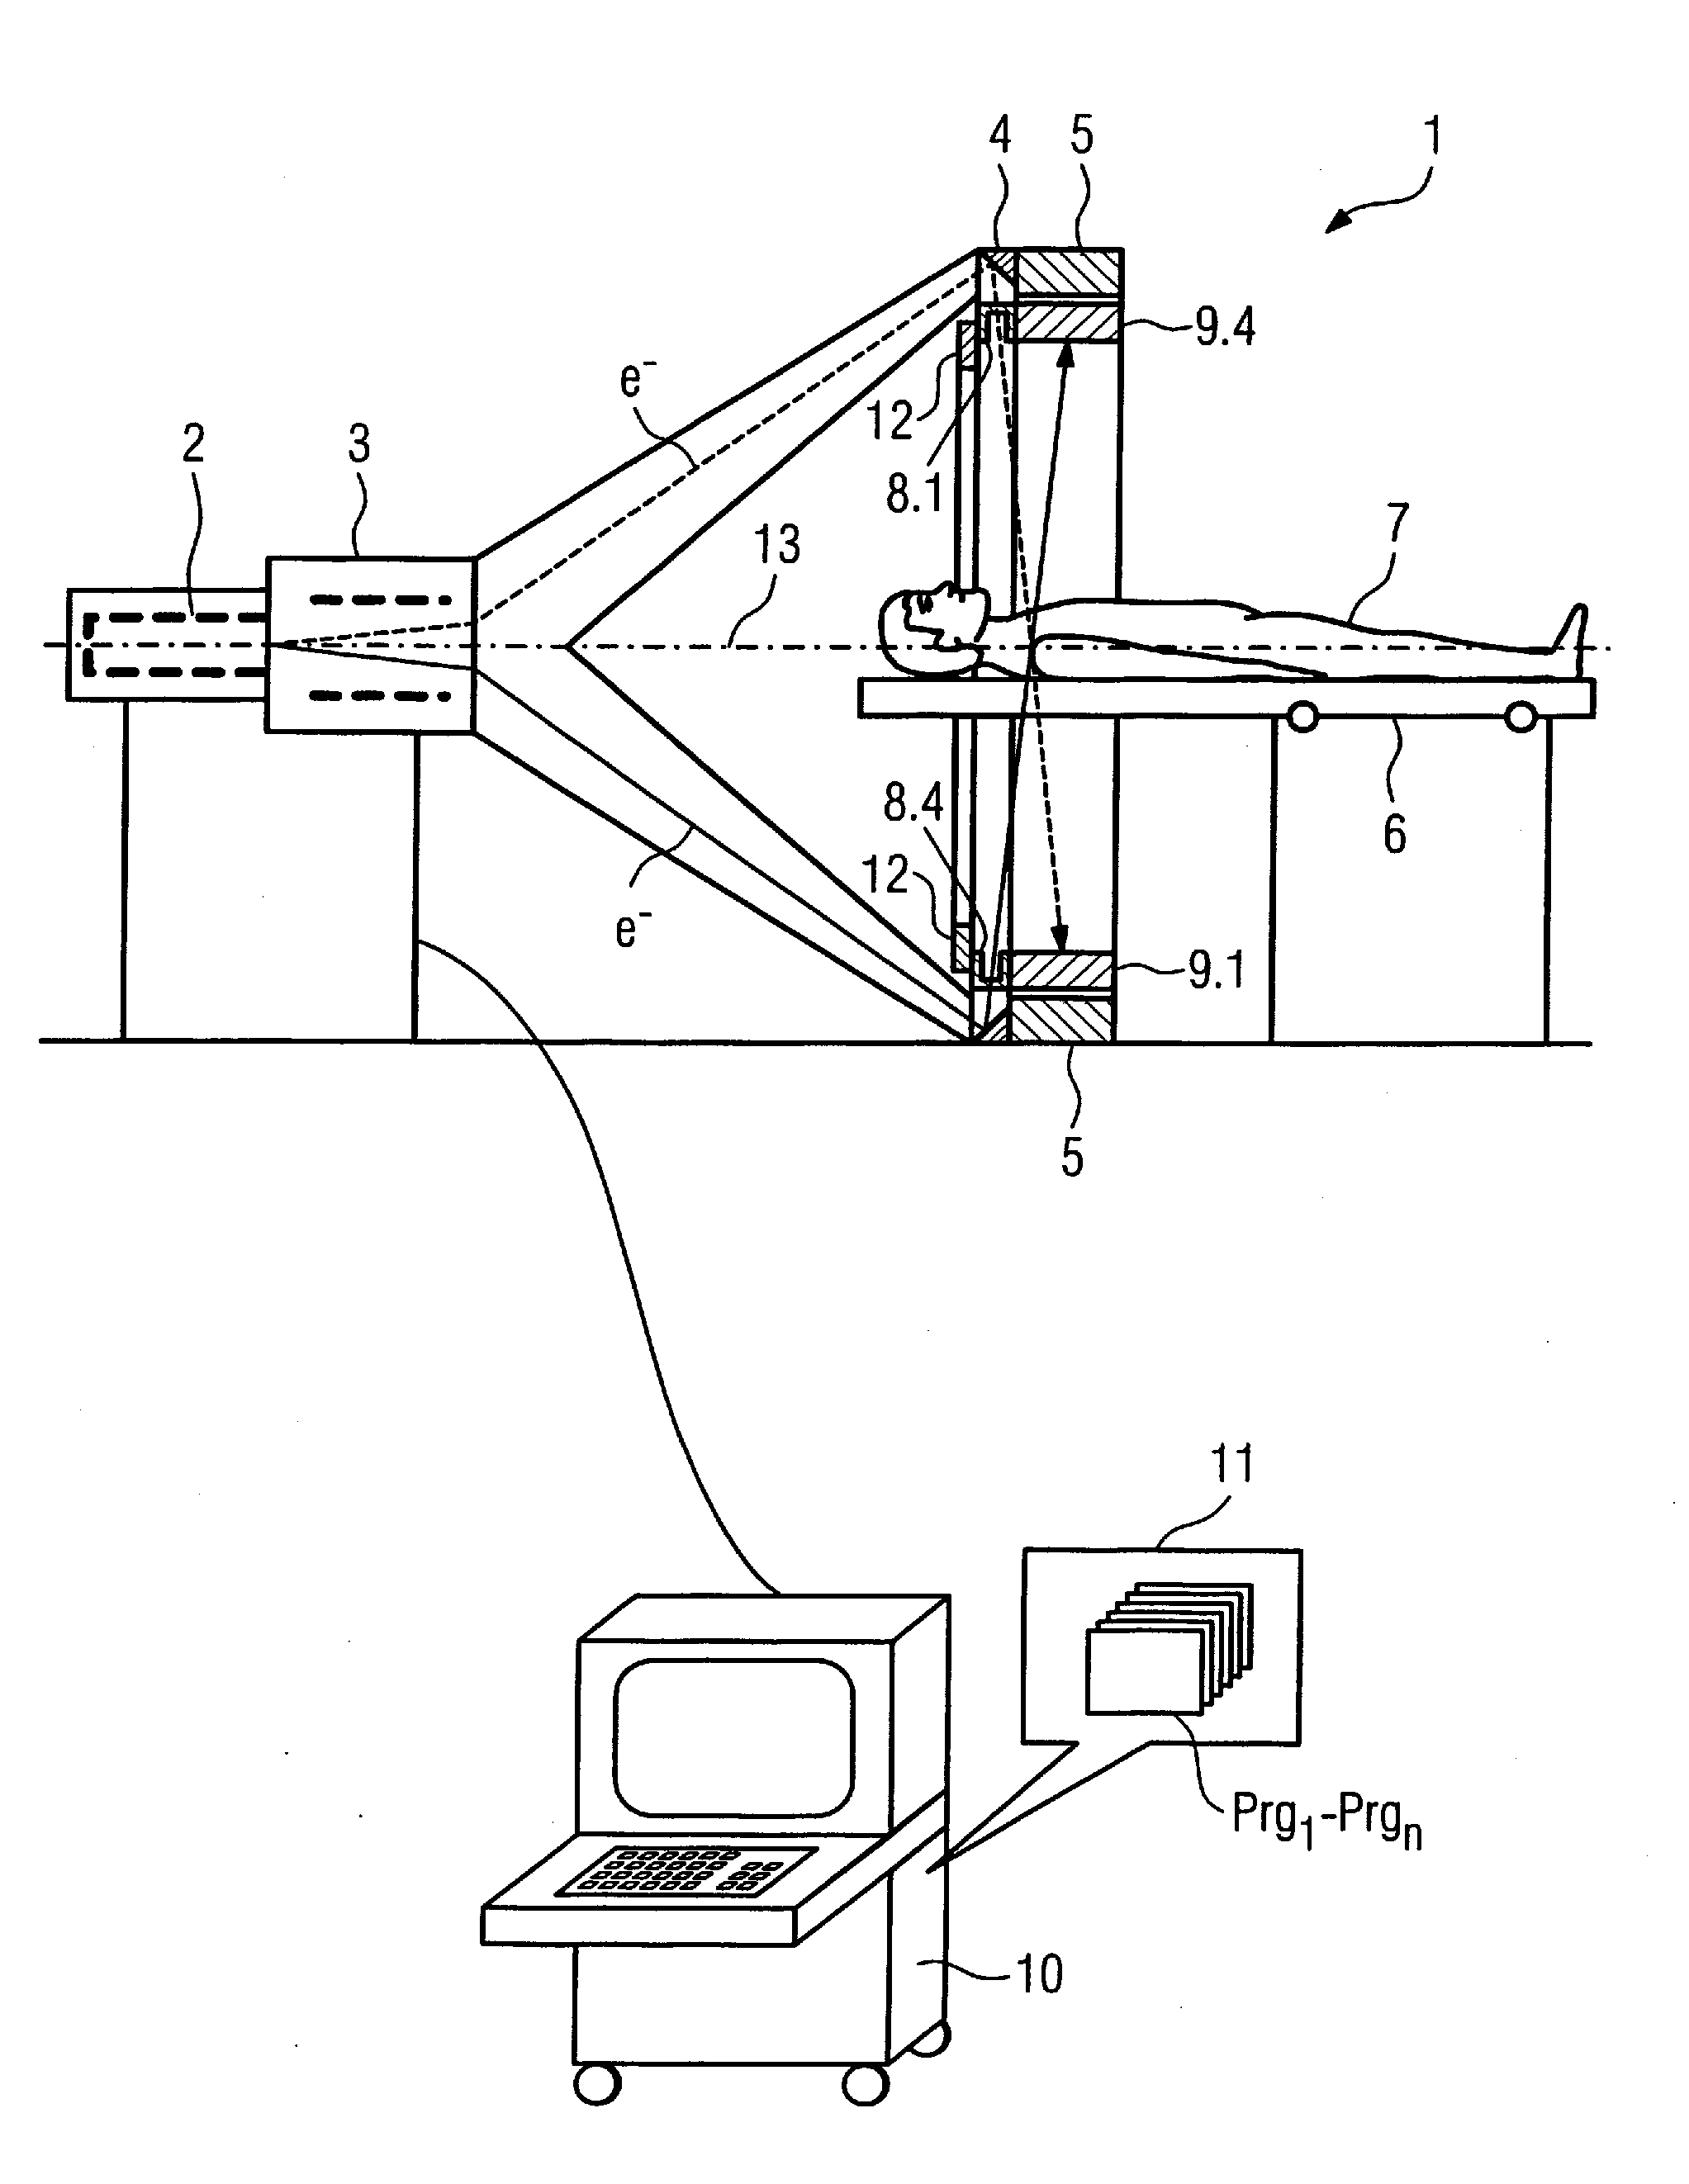 Fifth generation x-ray computed tomography system and operating method